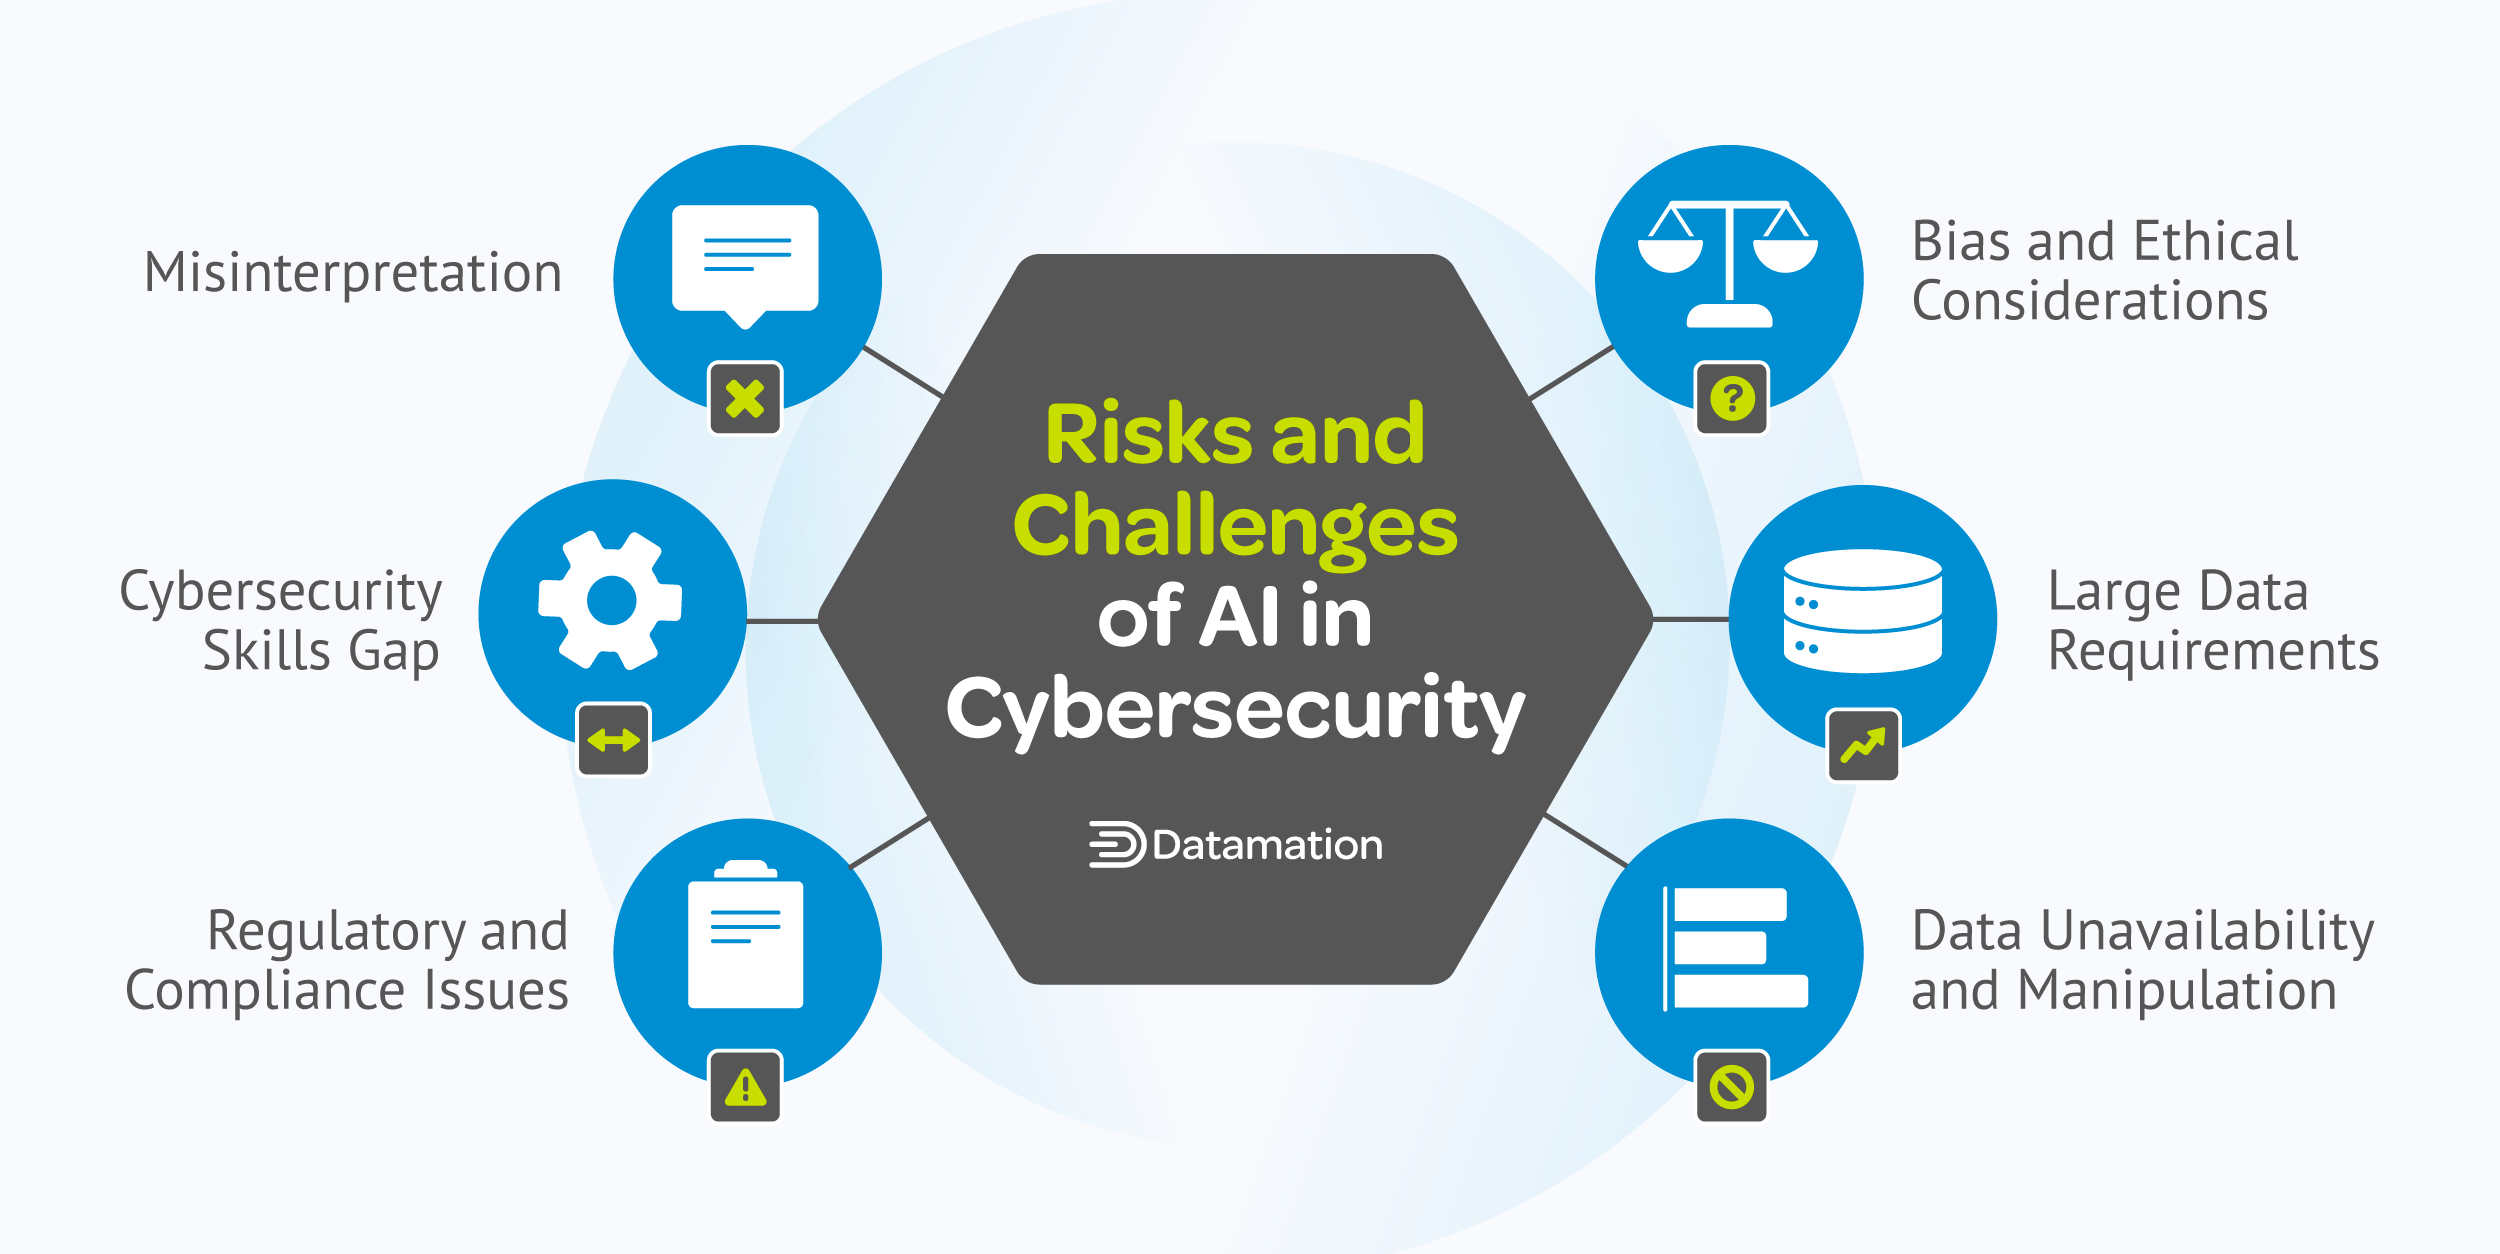 Risks and Challenges of AI in Cybersecurity